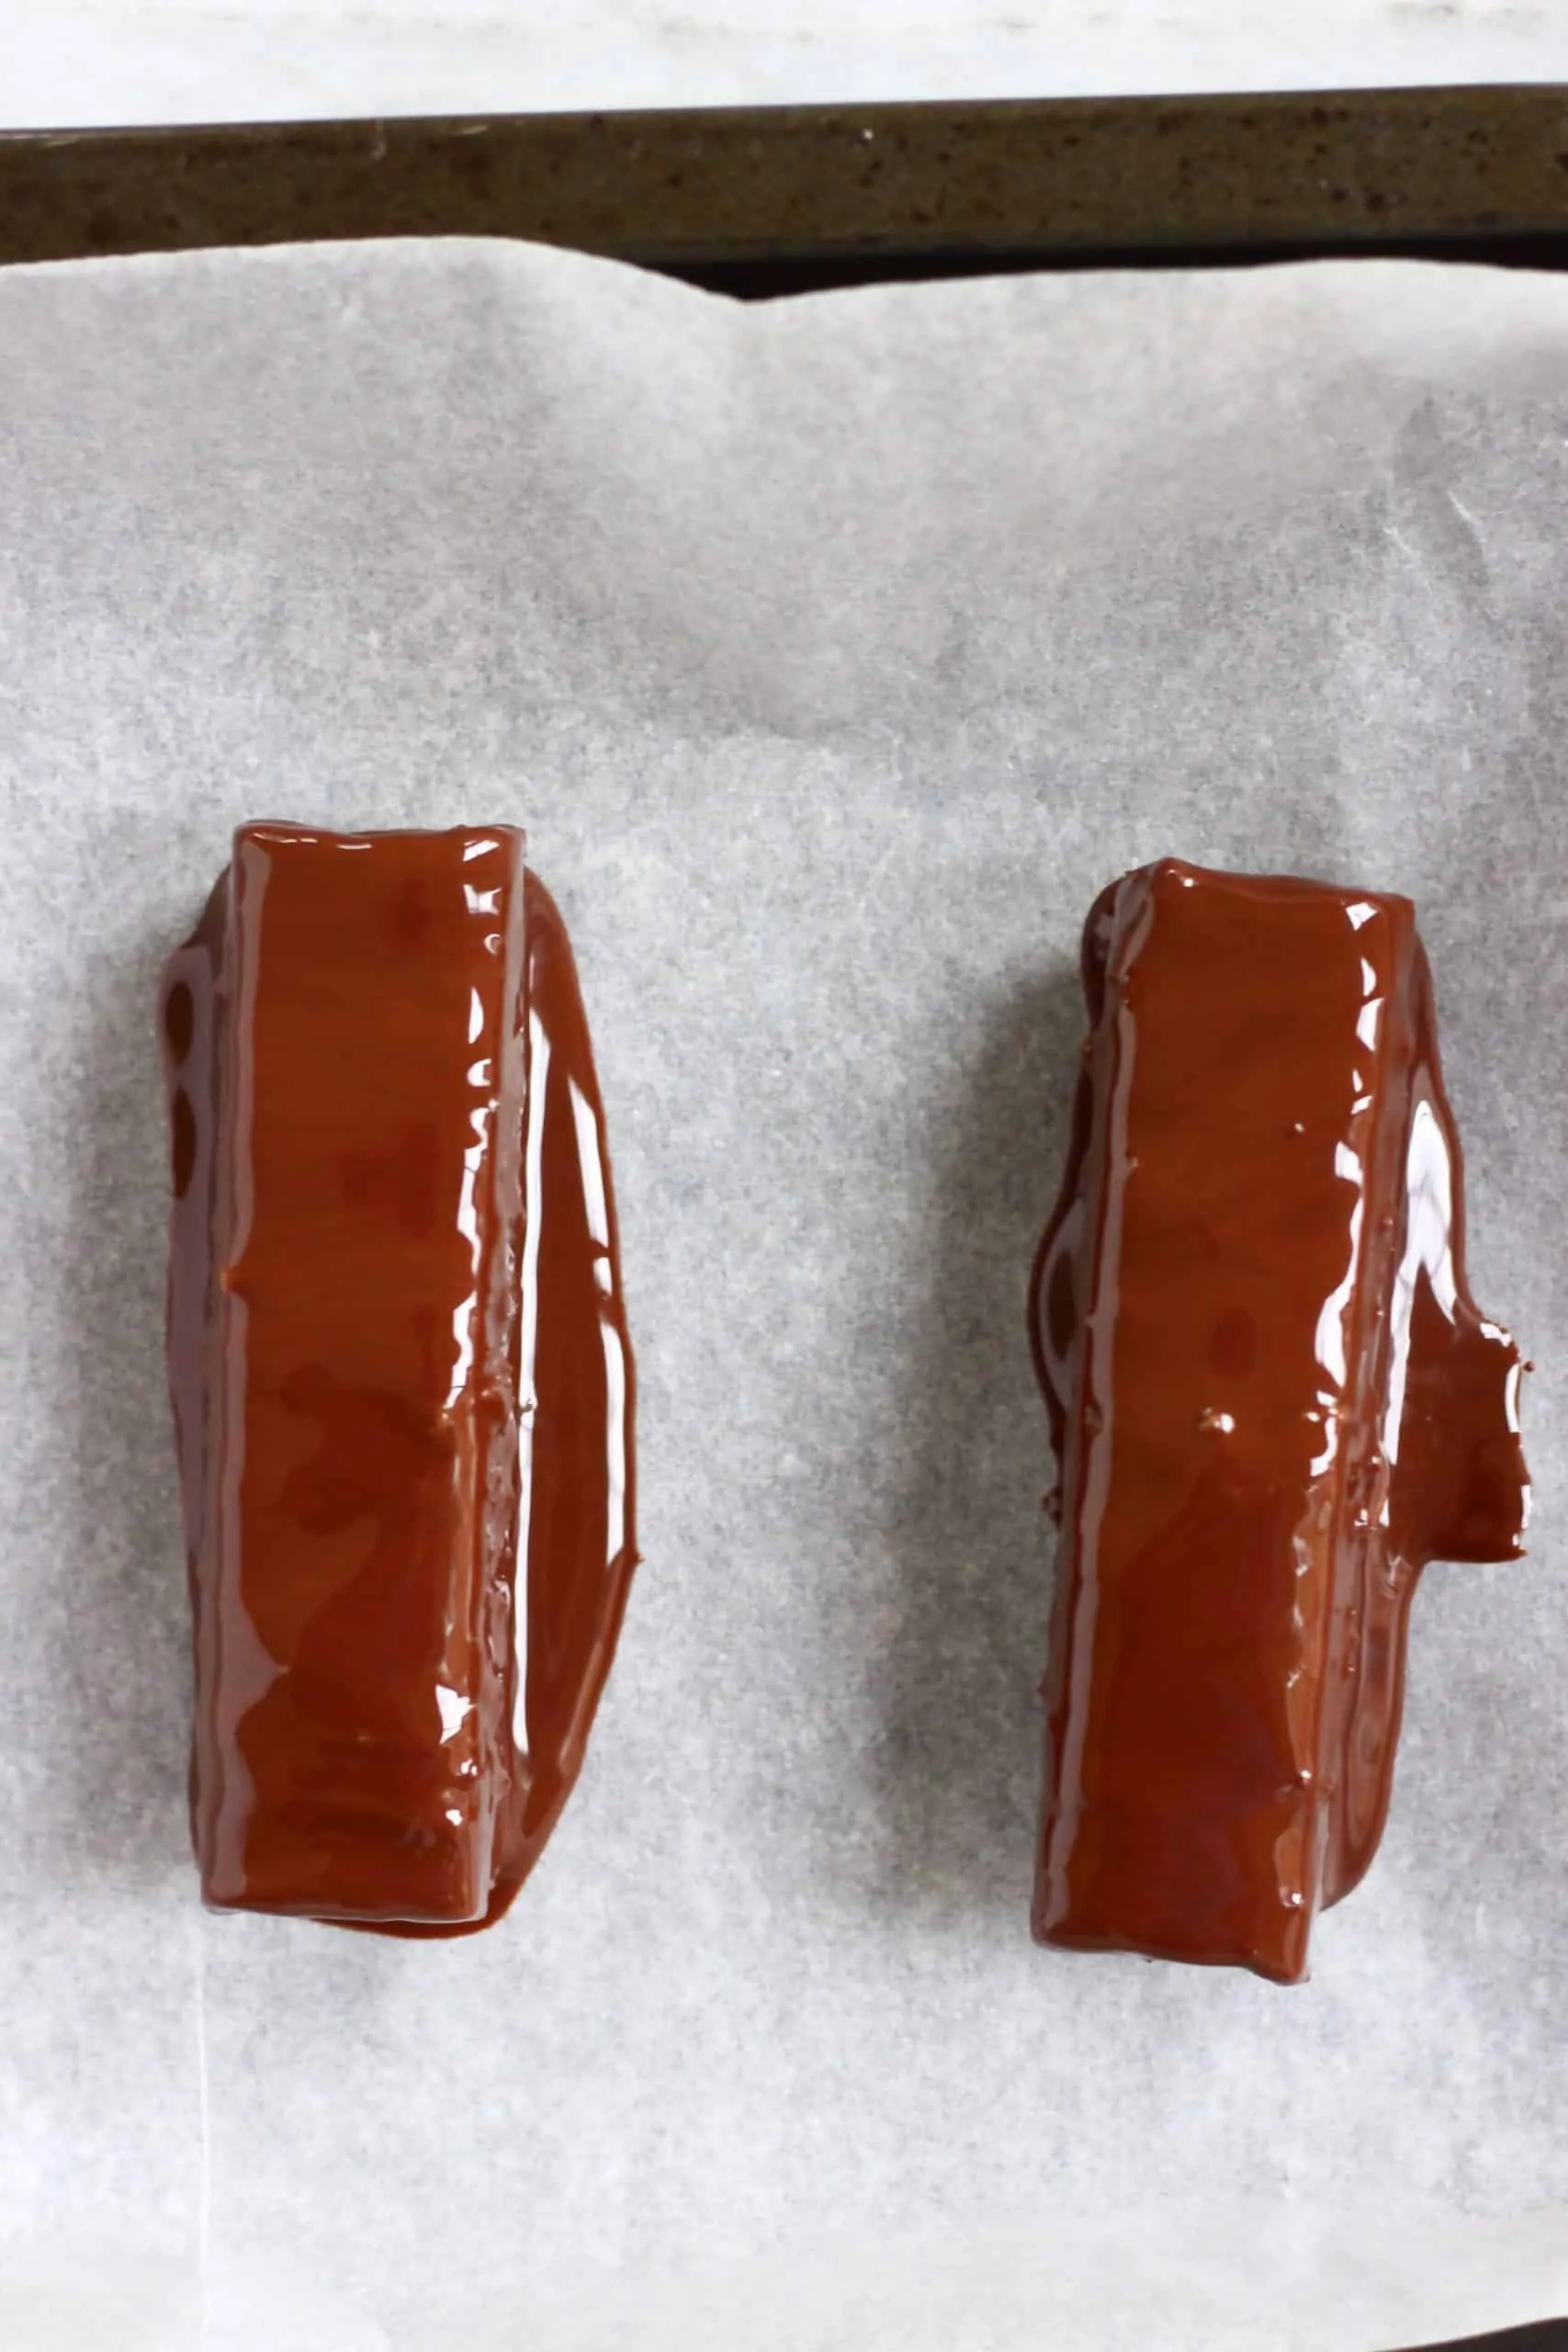 Two vegan twix bars dipped in melted chocolate on a tray lined with baking paper